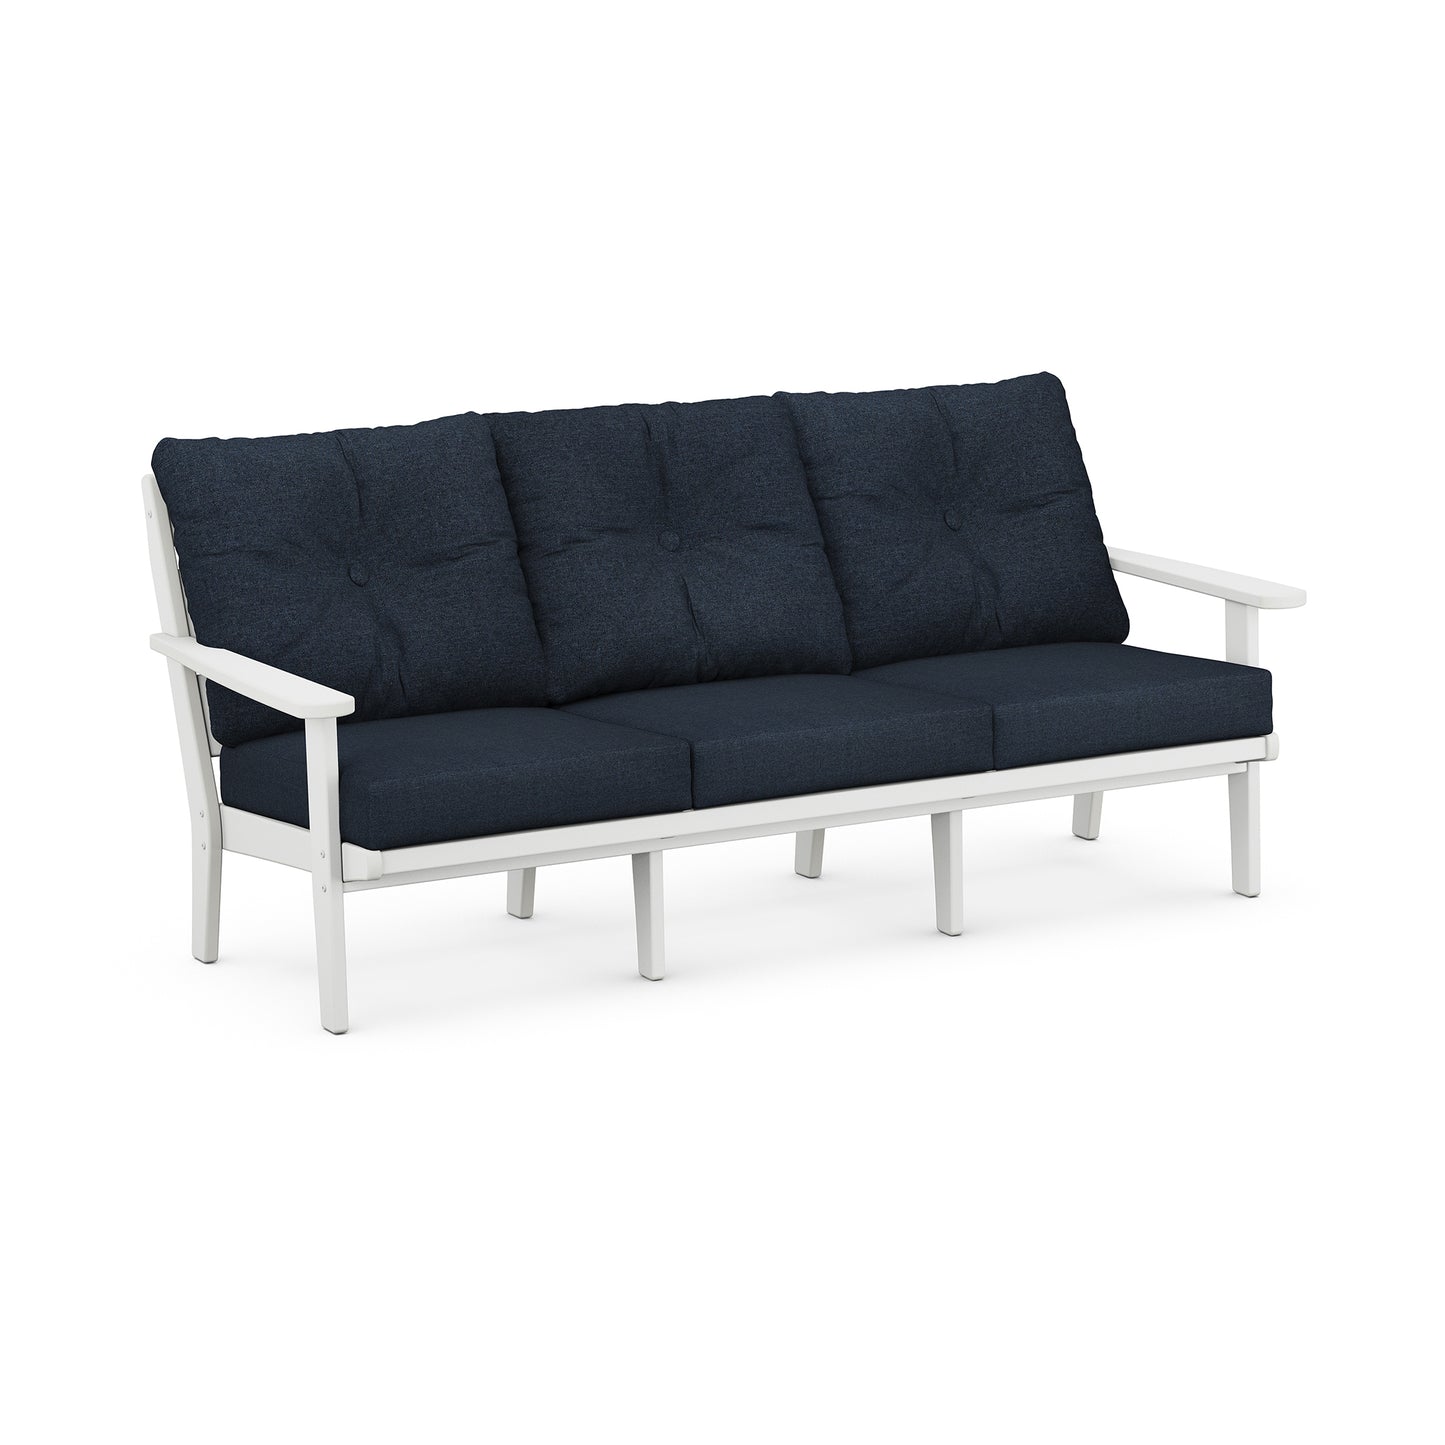 A modern three-seater outdoor sofa with a white aluminum frame and deep blue cushions, crafted from all-weather POLYWOOD lumber, isolated on a white background.